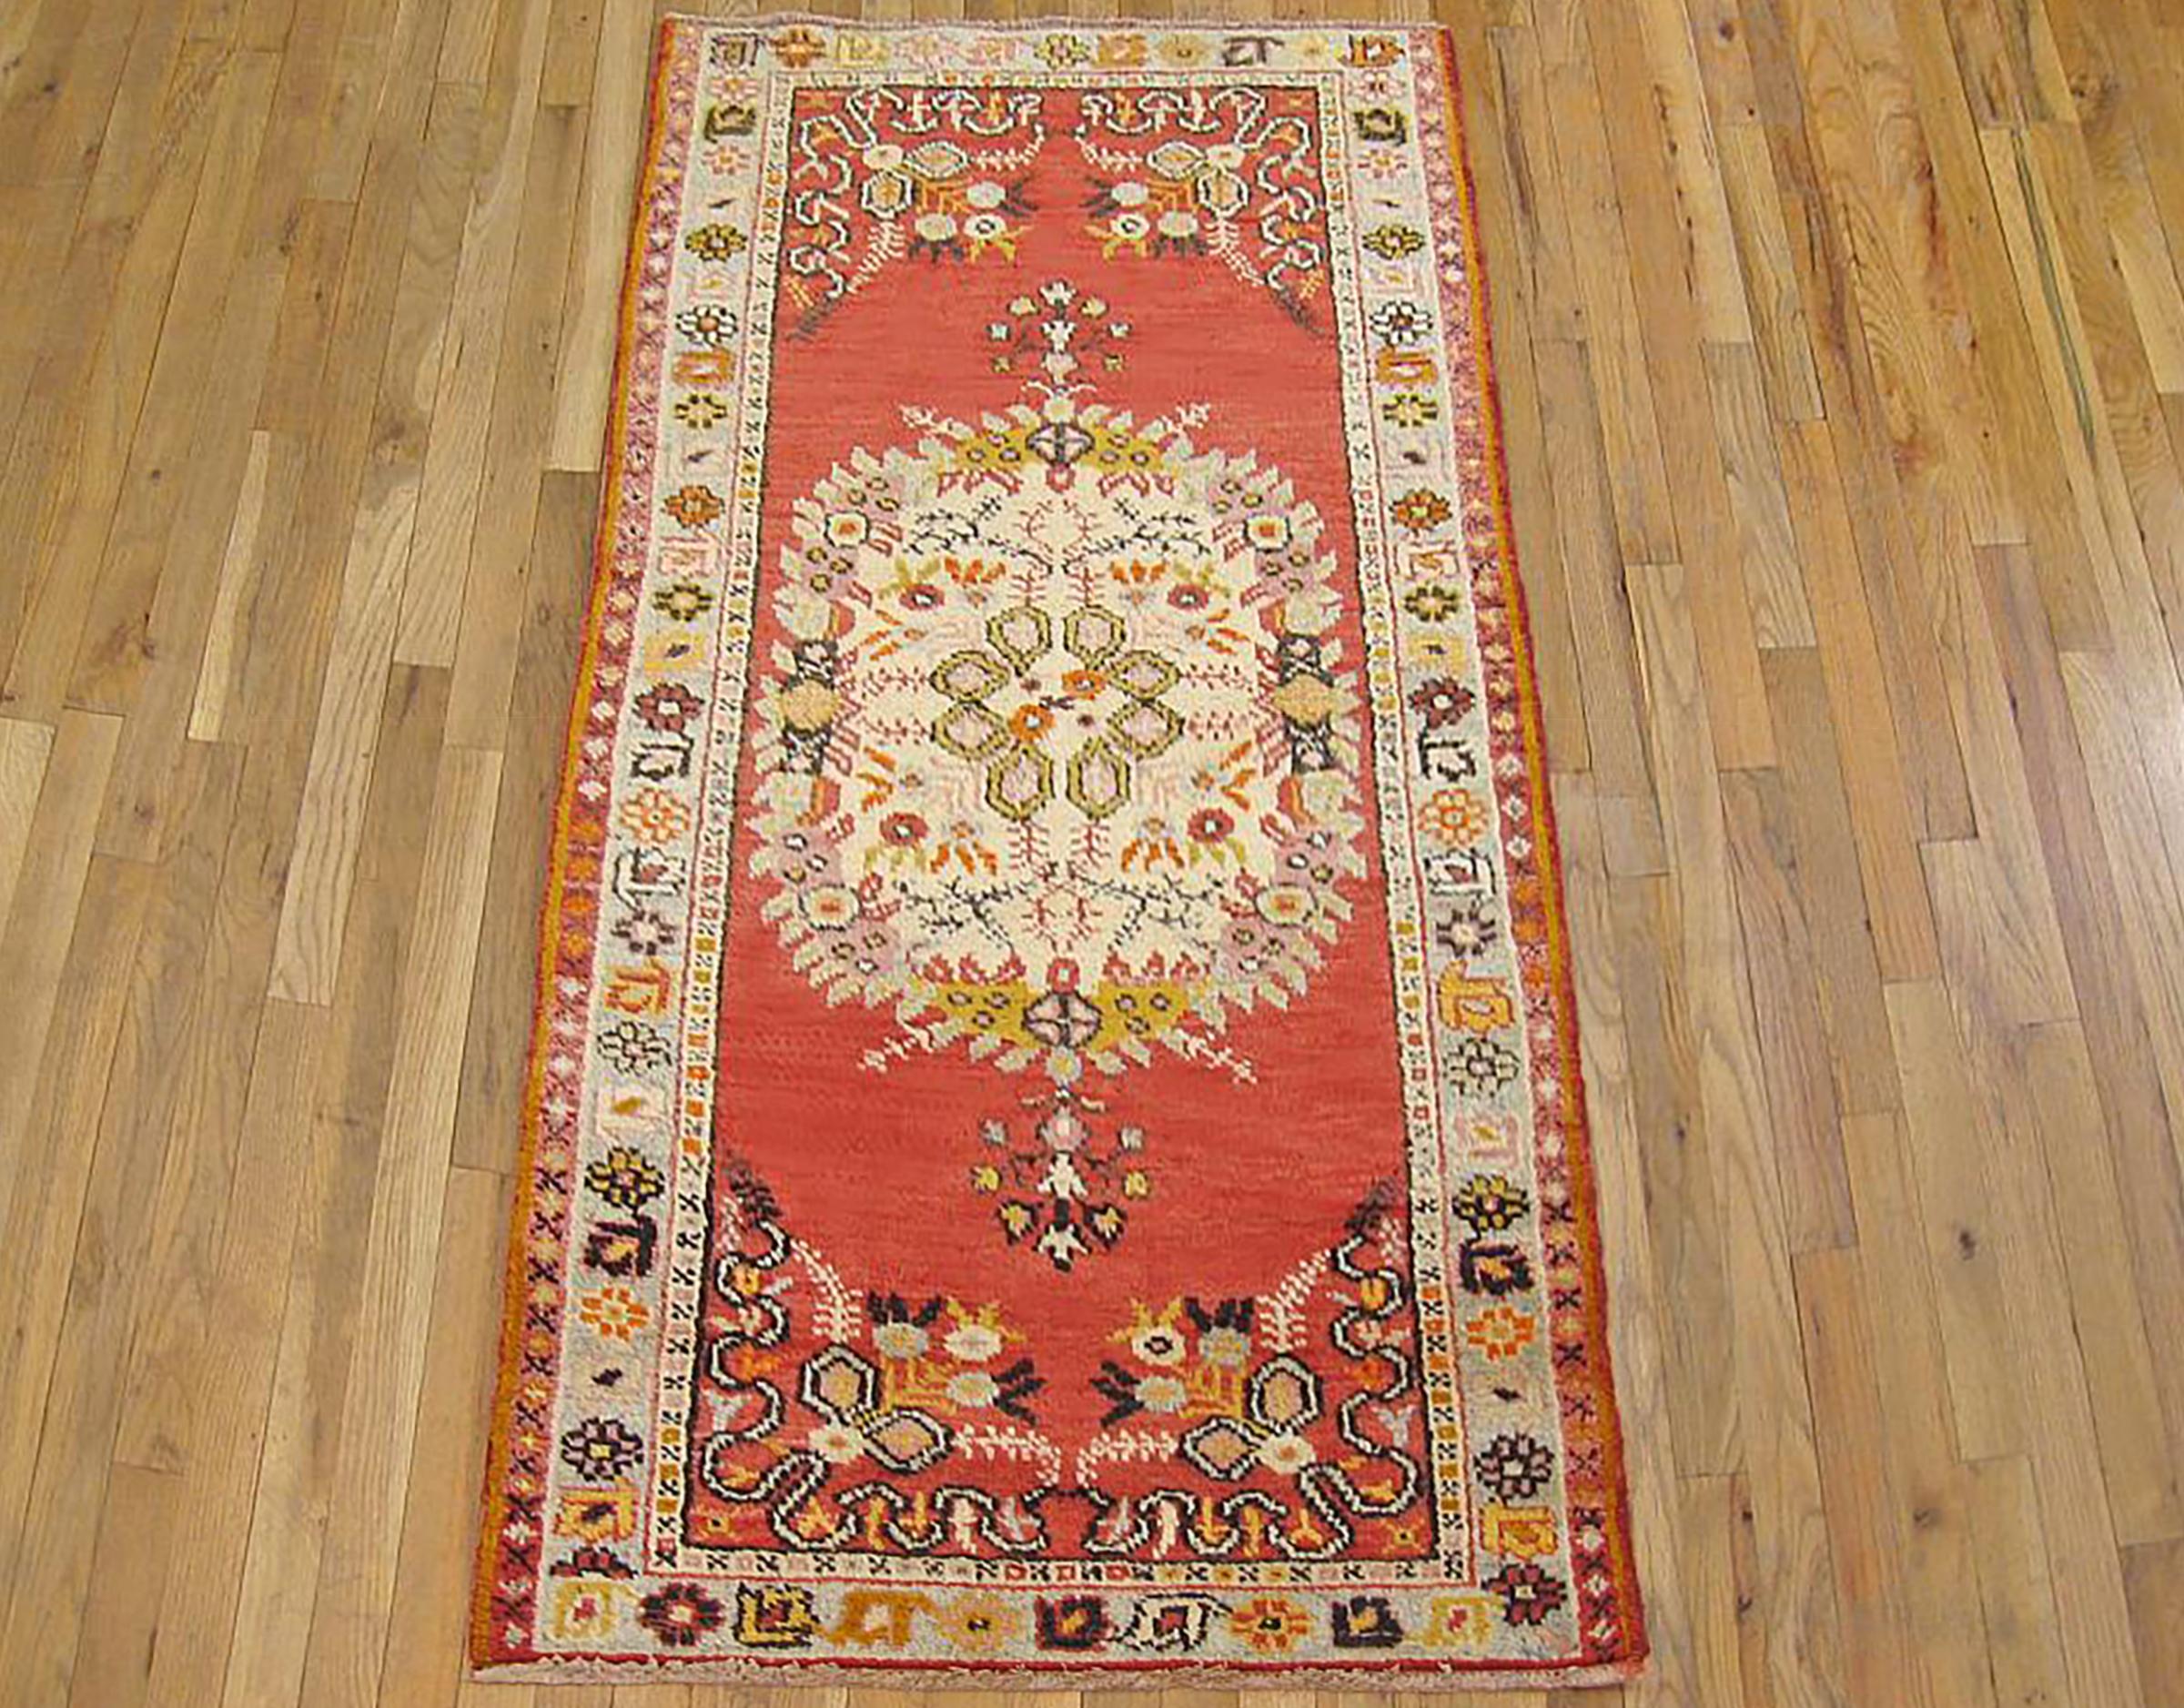 Vintage Turkish Oushak Decorative Oriental Carpet, Runner size, with Soft red Field

A gorgeous vintage Turkish Oushak carpet, circa 1950, size 5'5